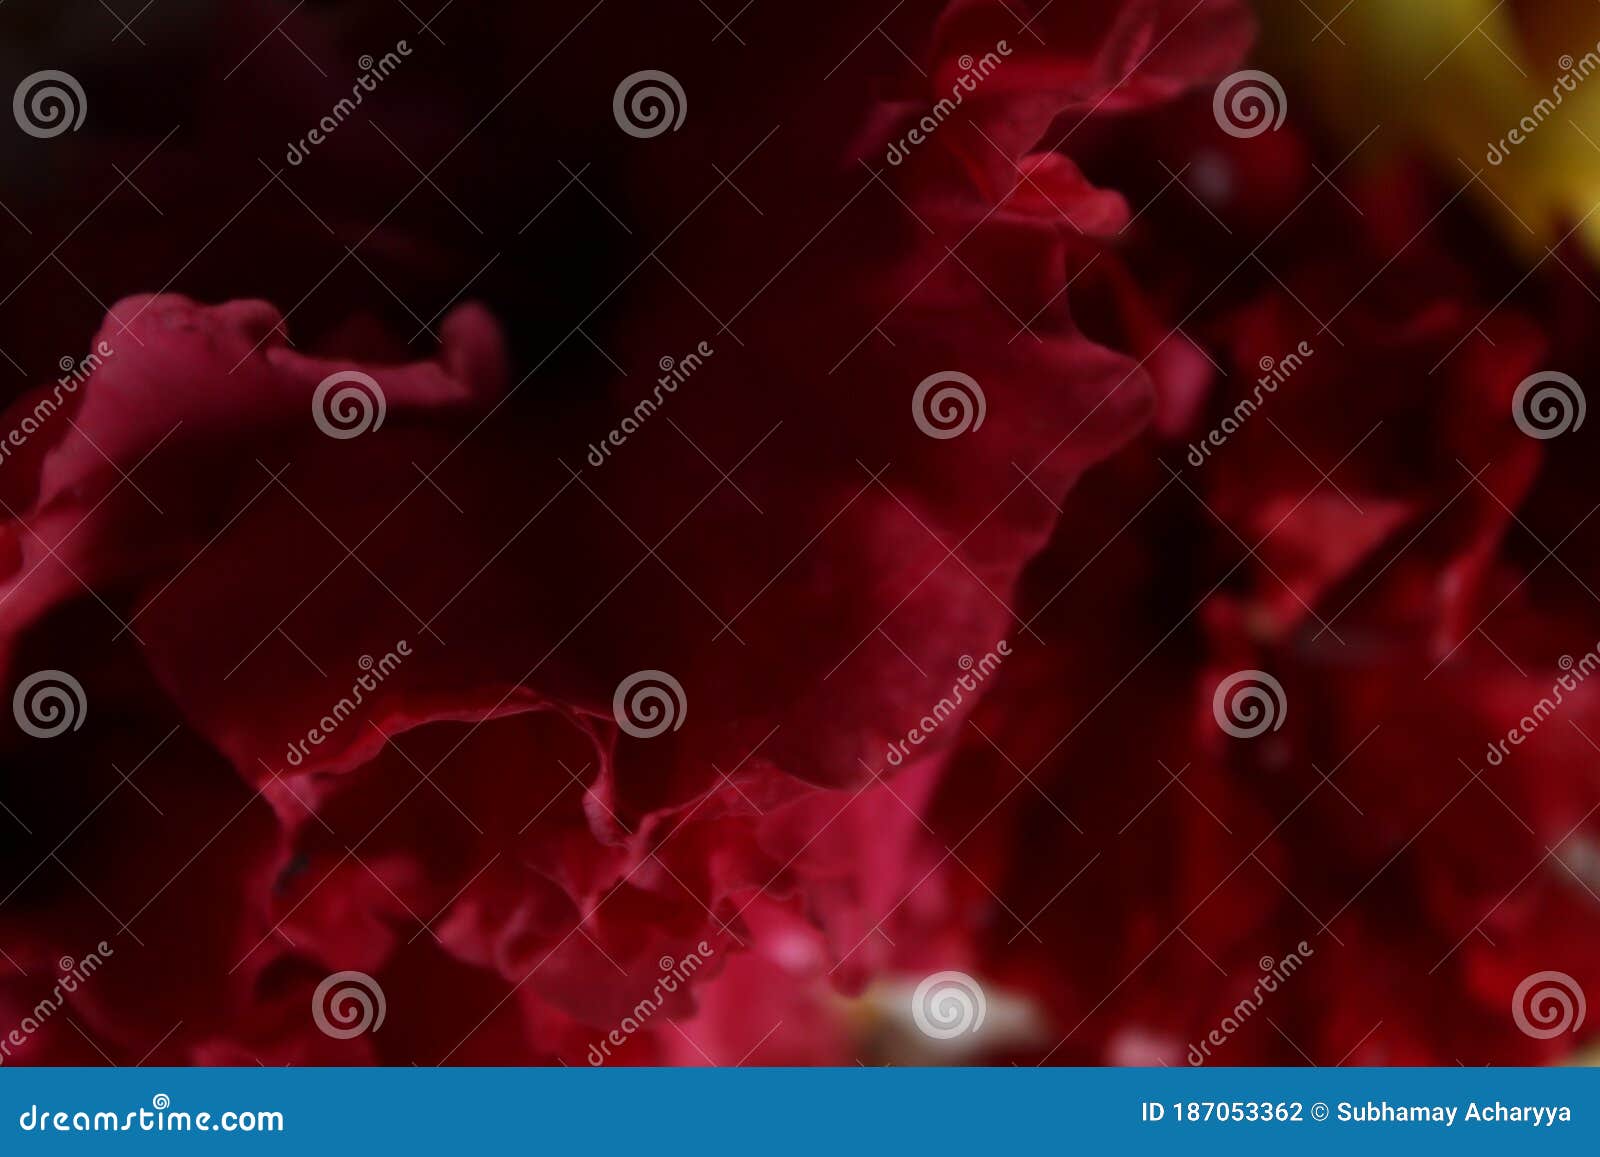 Abstract Red and Black Background Wallpaper. Beautiful Abstract Mixed  Colors Display Stock Photo - Image of artistic, display: 187053362